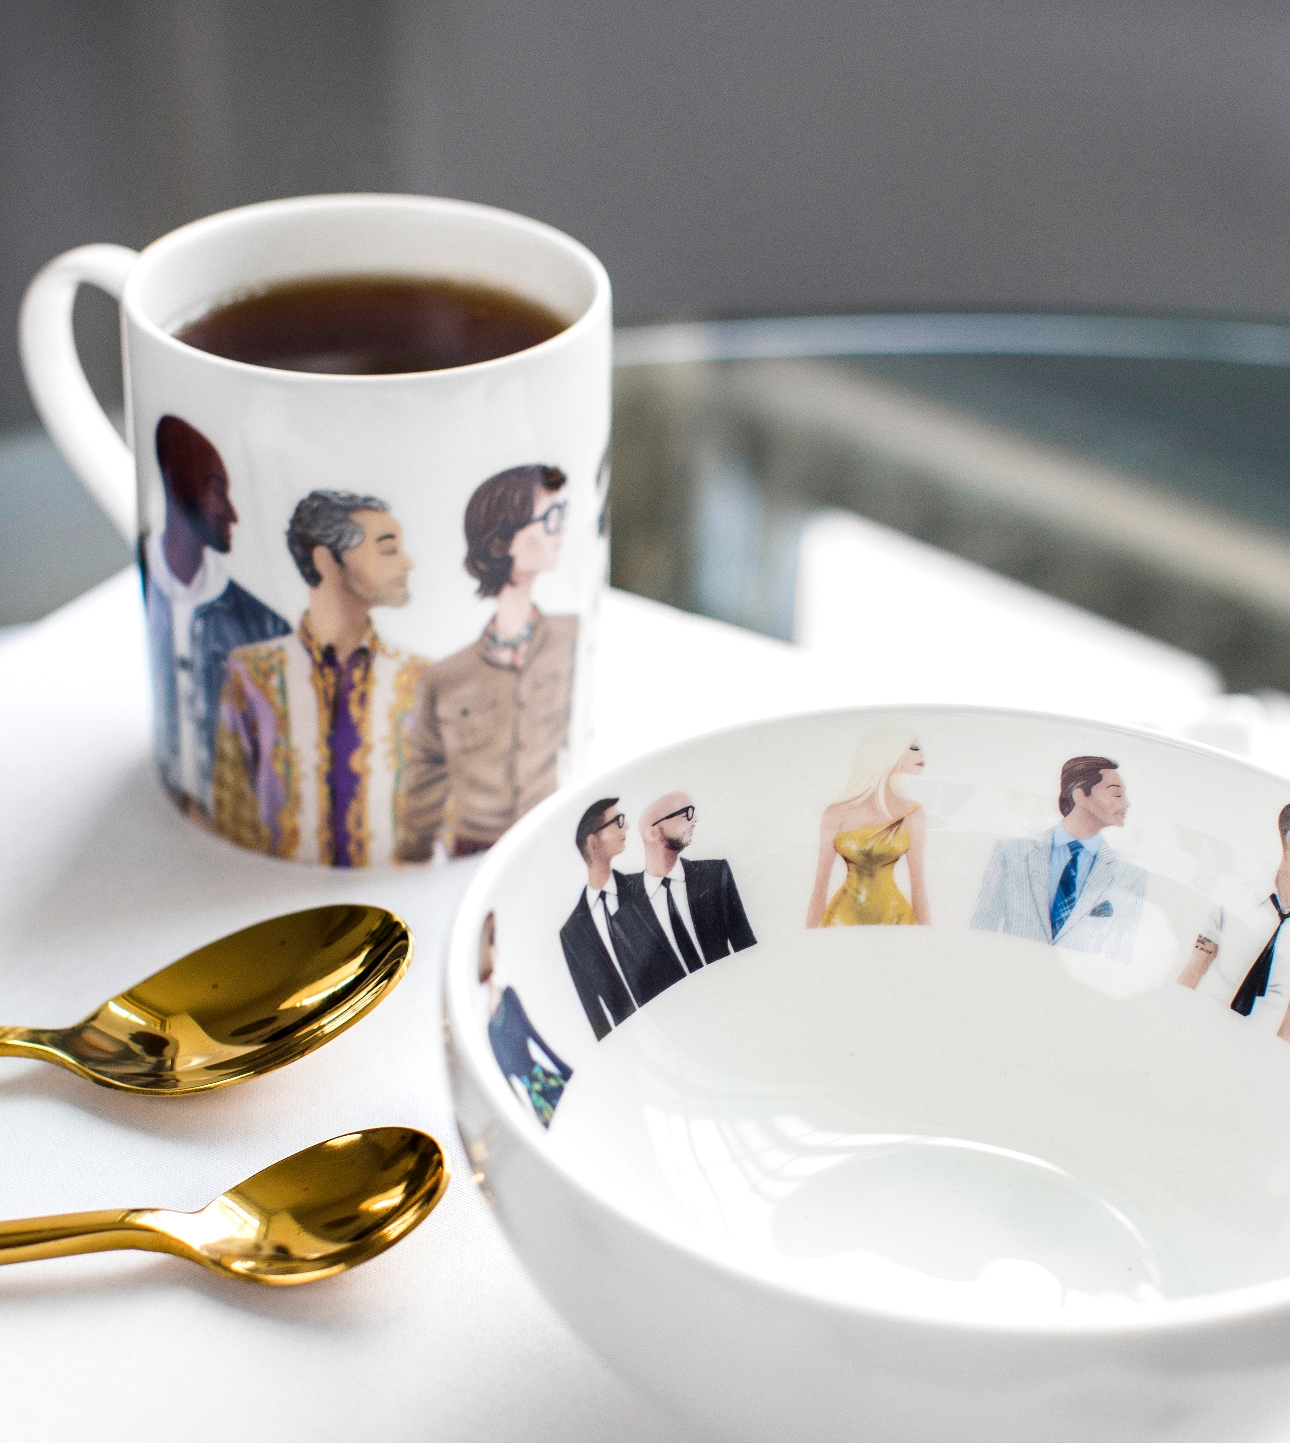 white bowl with famous people on the inside rim in cartoon form also a matching mug and gold spoon on table